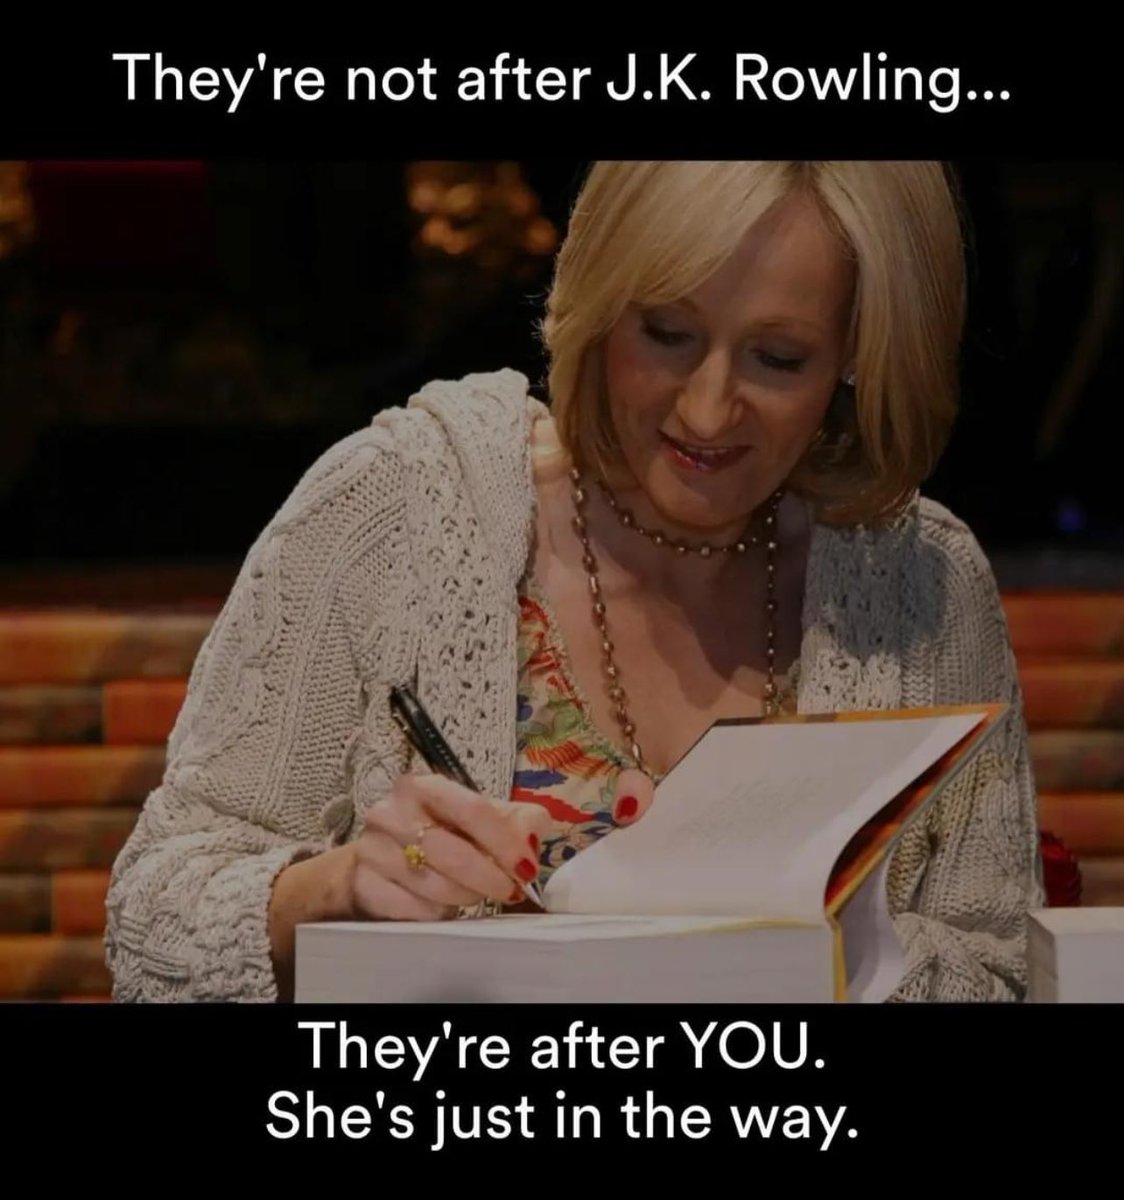 #IStandWithJKRowling